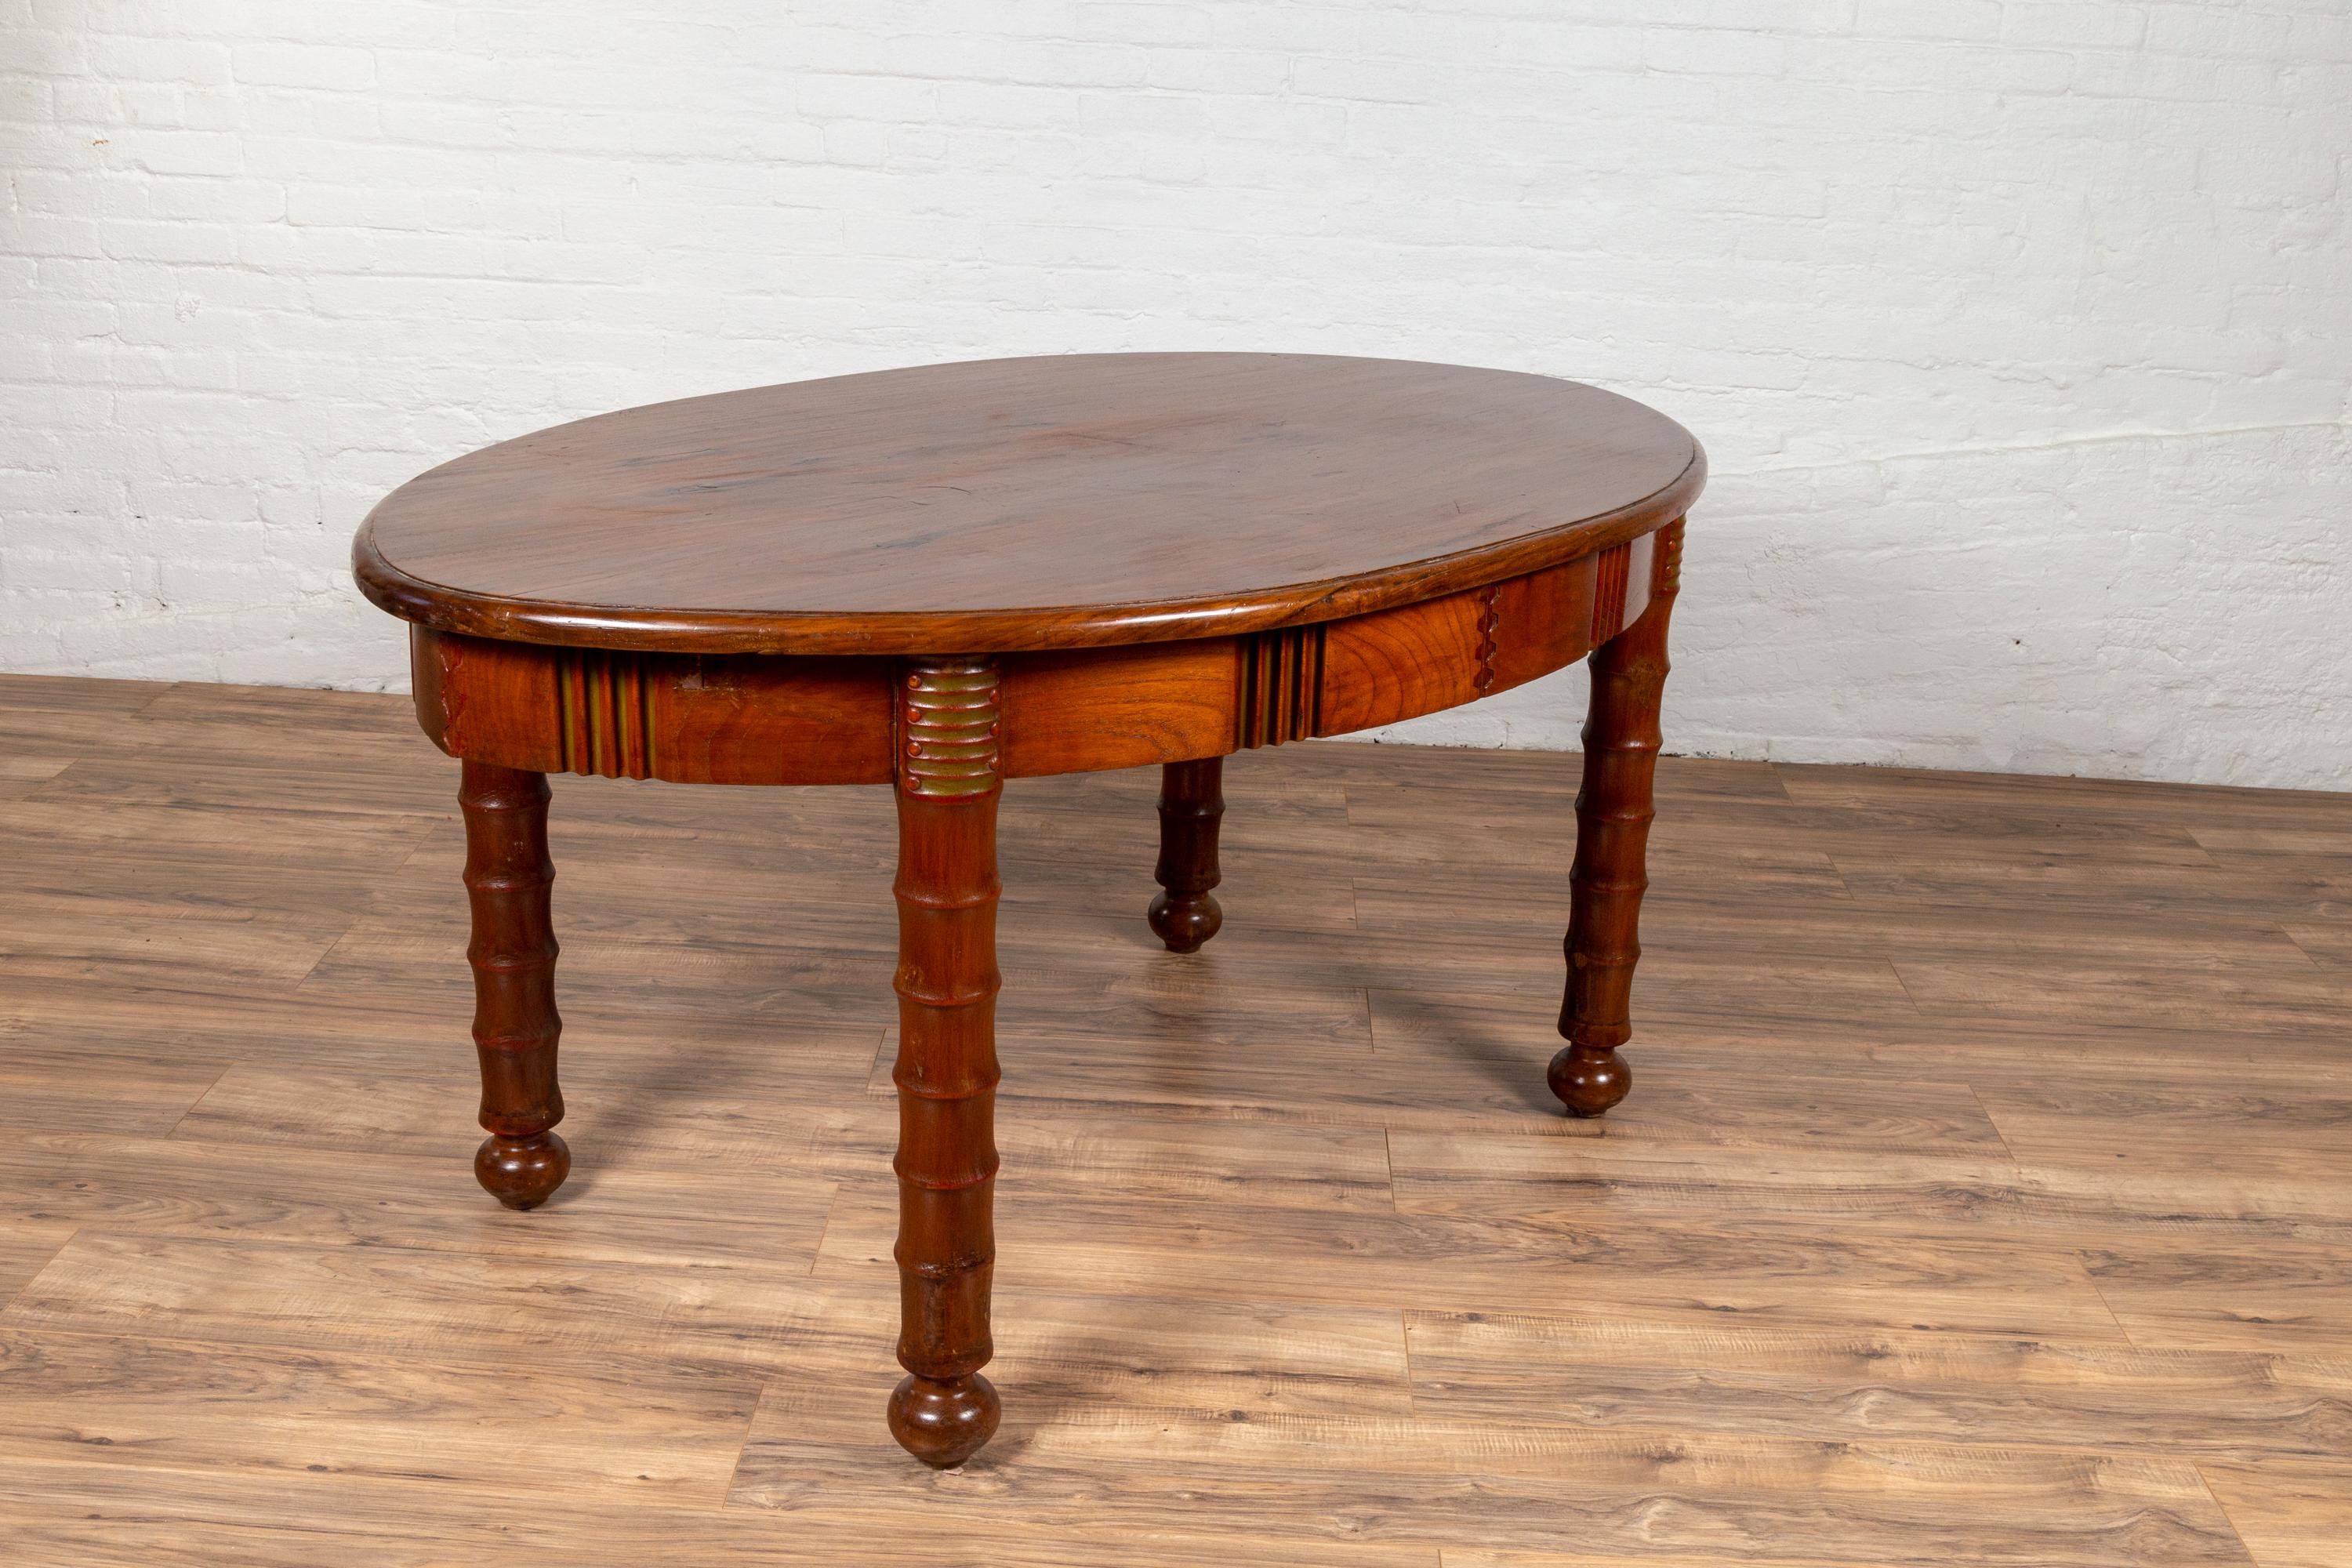 Antique Oval Dining Room Table from Indonesia with Spindle Legs and Warm Patina For Sale 4